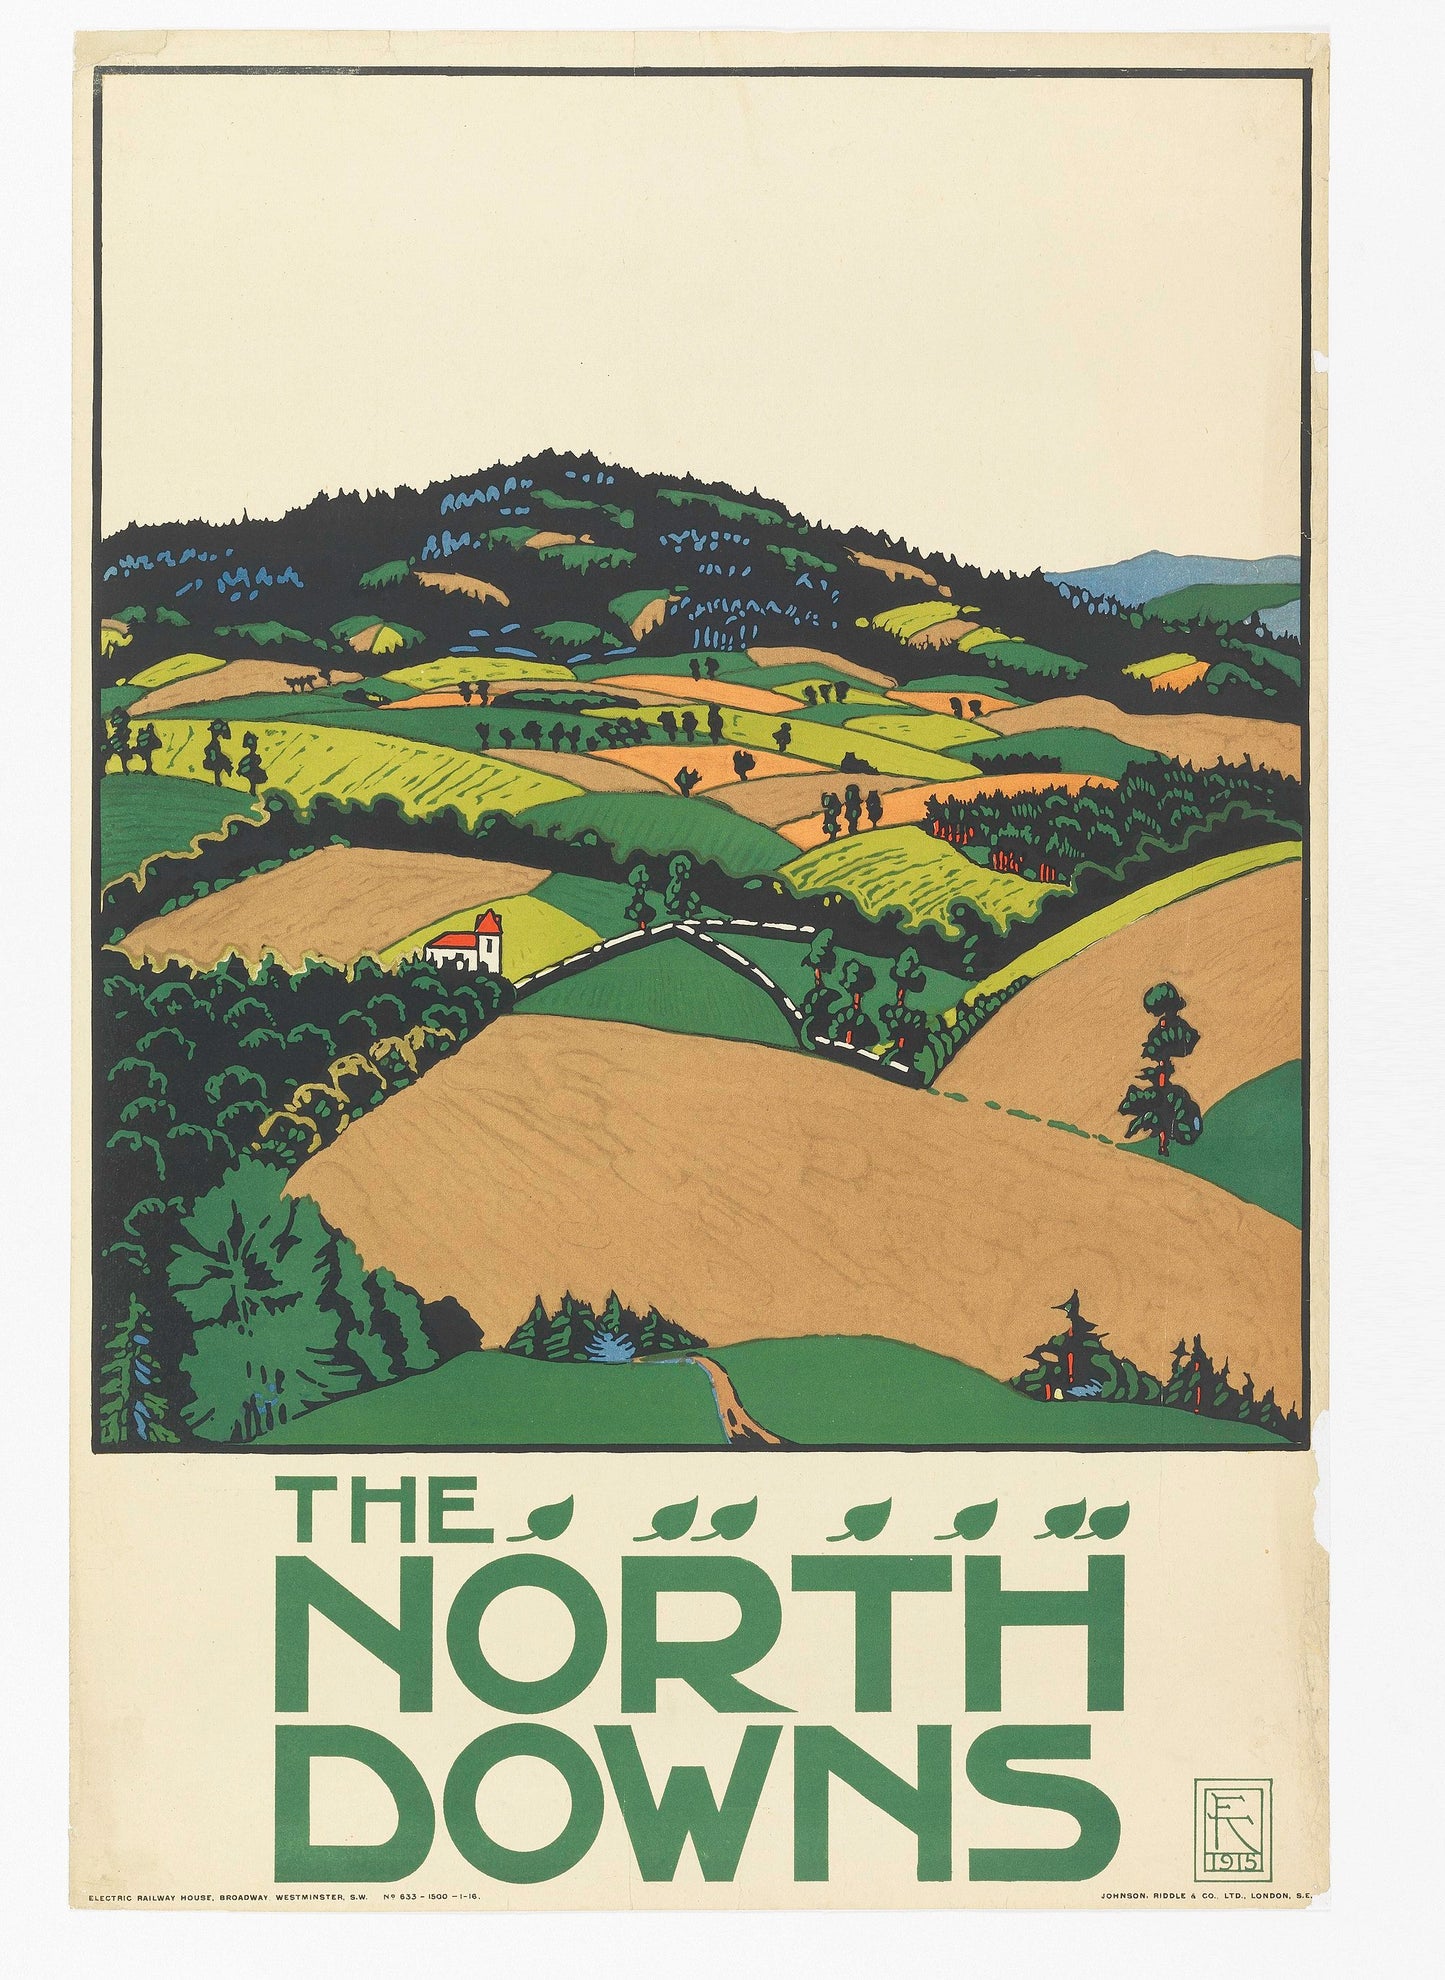 The North Downs (1900s) London Underground | Vintage Travel Posters | Kauffer Posters, Prints, & Visual Artwork The Trumpet Shop   